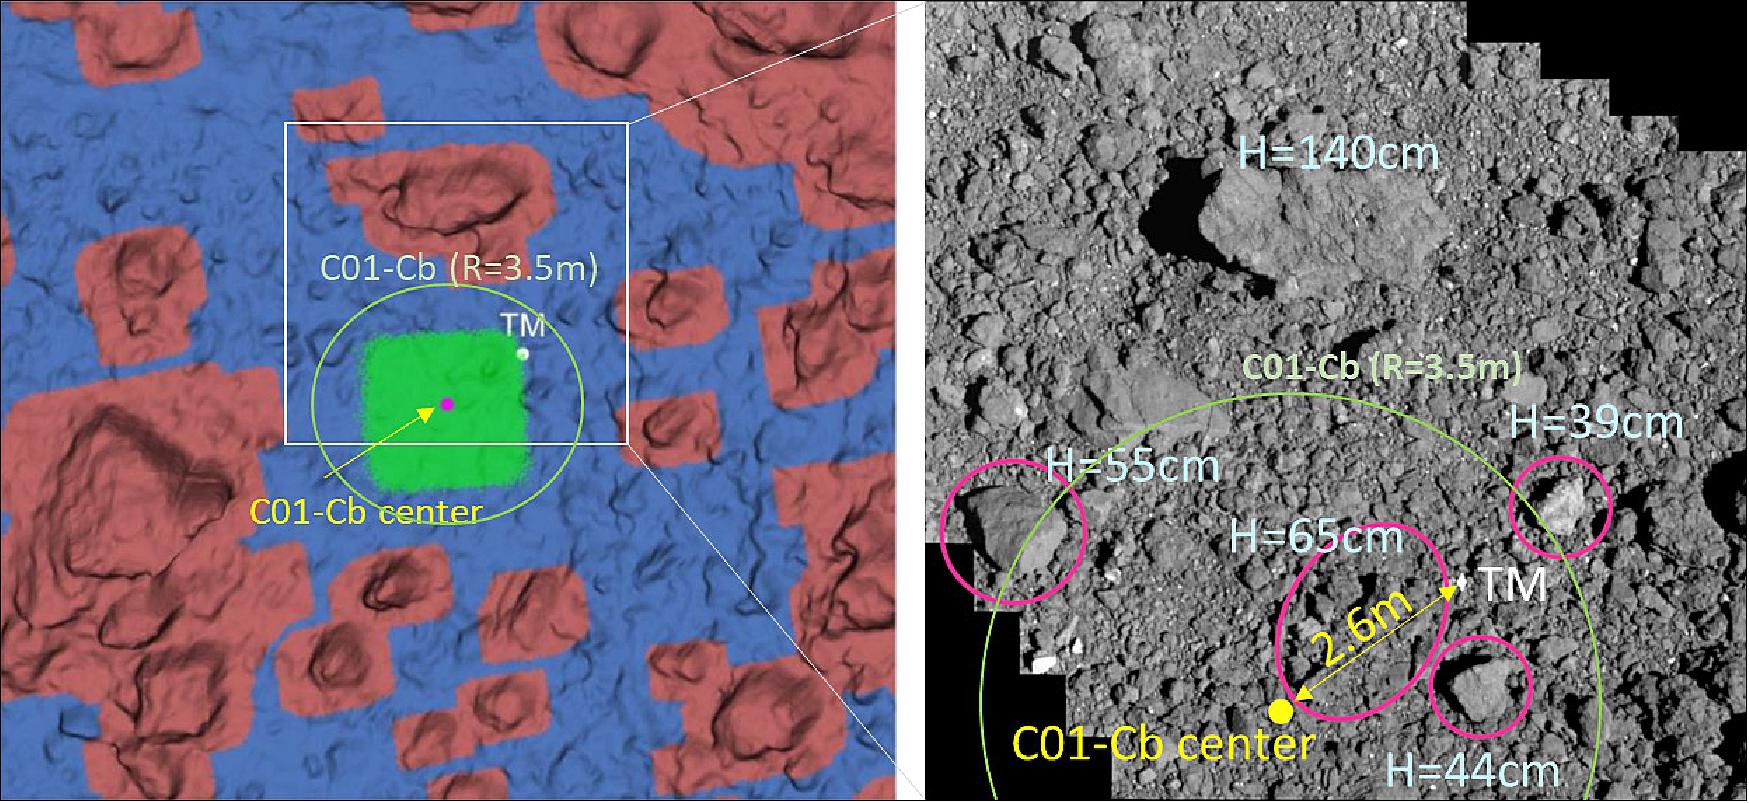 Figure 49: Left: Landing dispersion analysis. Green dots indicate the landing dispersion obtained by a Monte-Carlo simulation. Blue region indicates safe for landing, and red region indicates unsafe. Right: High resolution image taken in PPTD-TM1B operation. Red ellipsoids indicate boulders marked for special safety caution with their estimated height. “TM” indicates the location of the target maker dropped in PPTD-TM1A operation, and “C01-Cb” indicates the landing target of the PPTD operation (image credit: Hayabusa-2 Team)